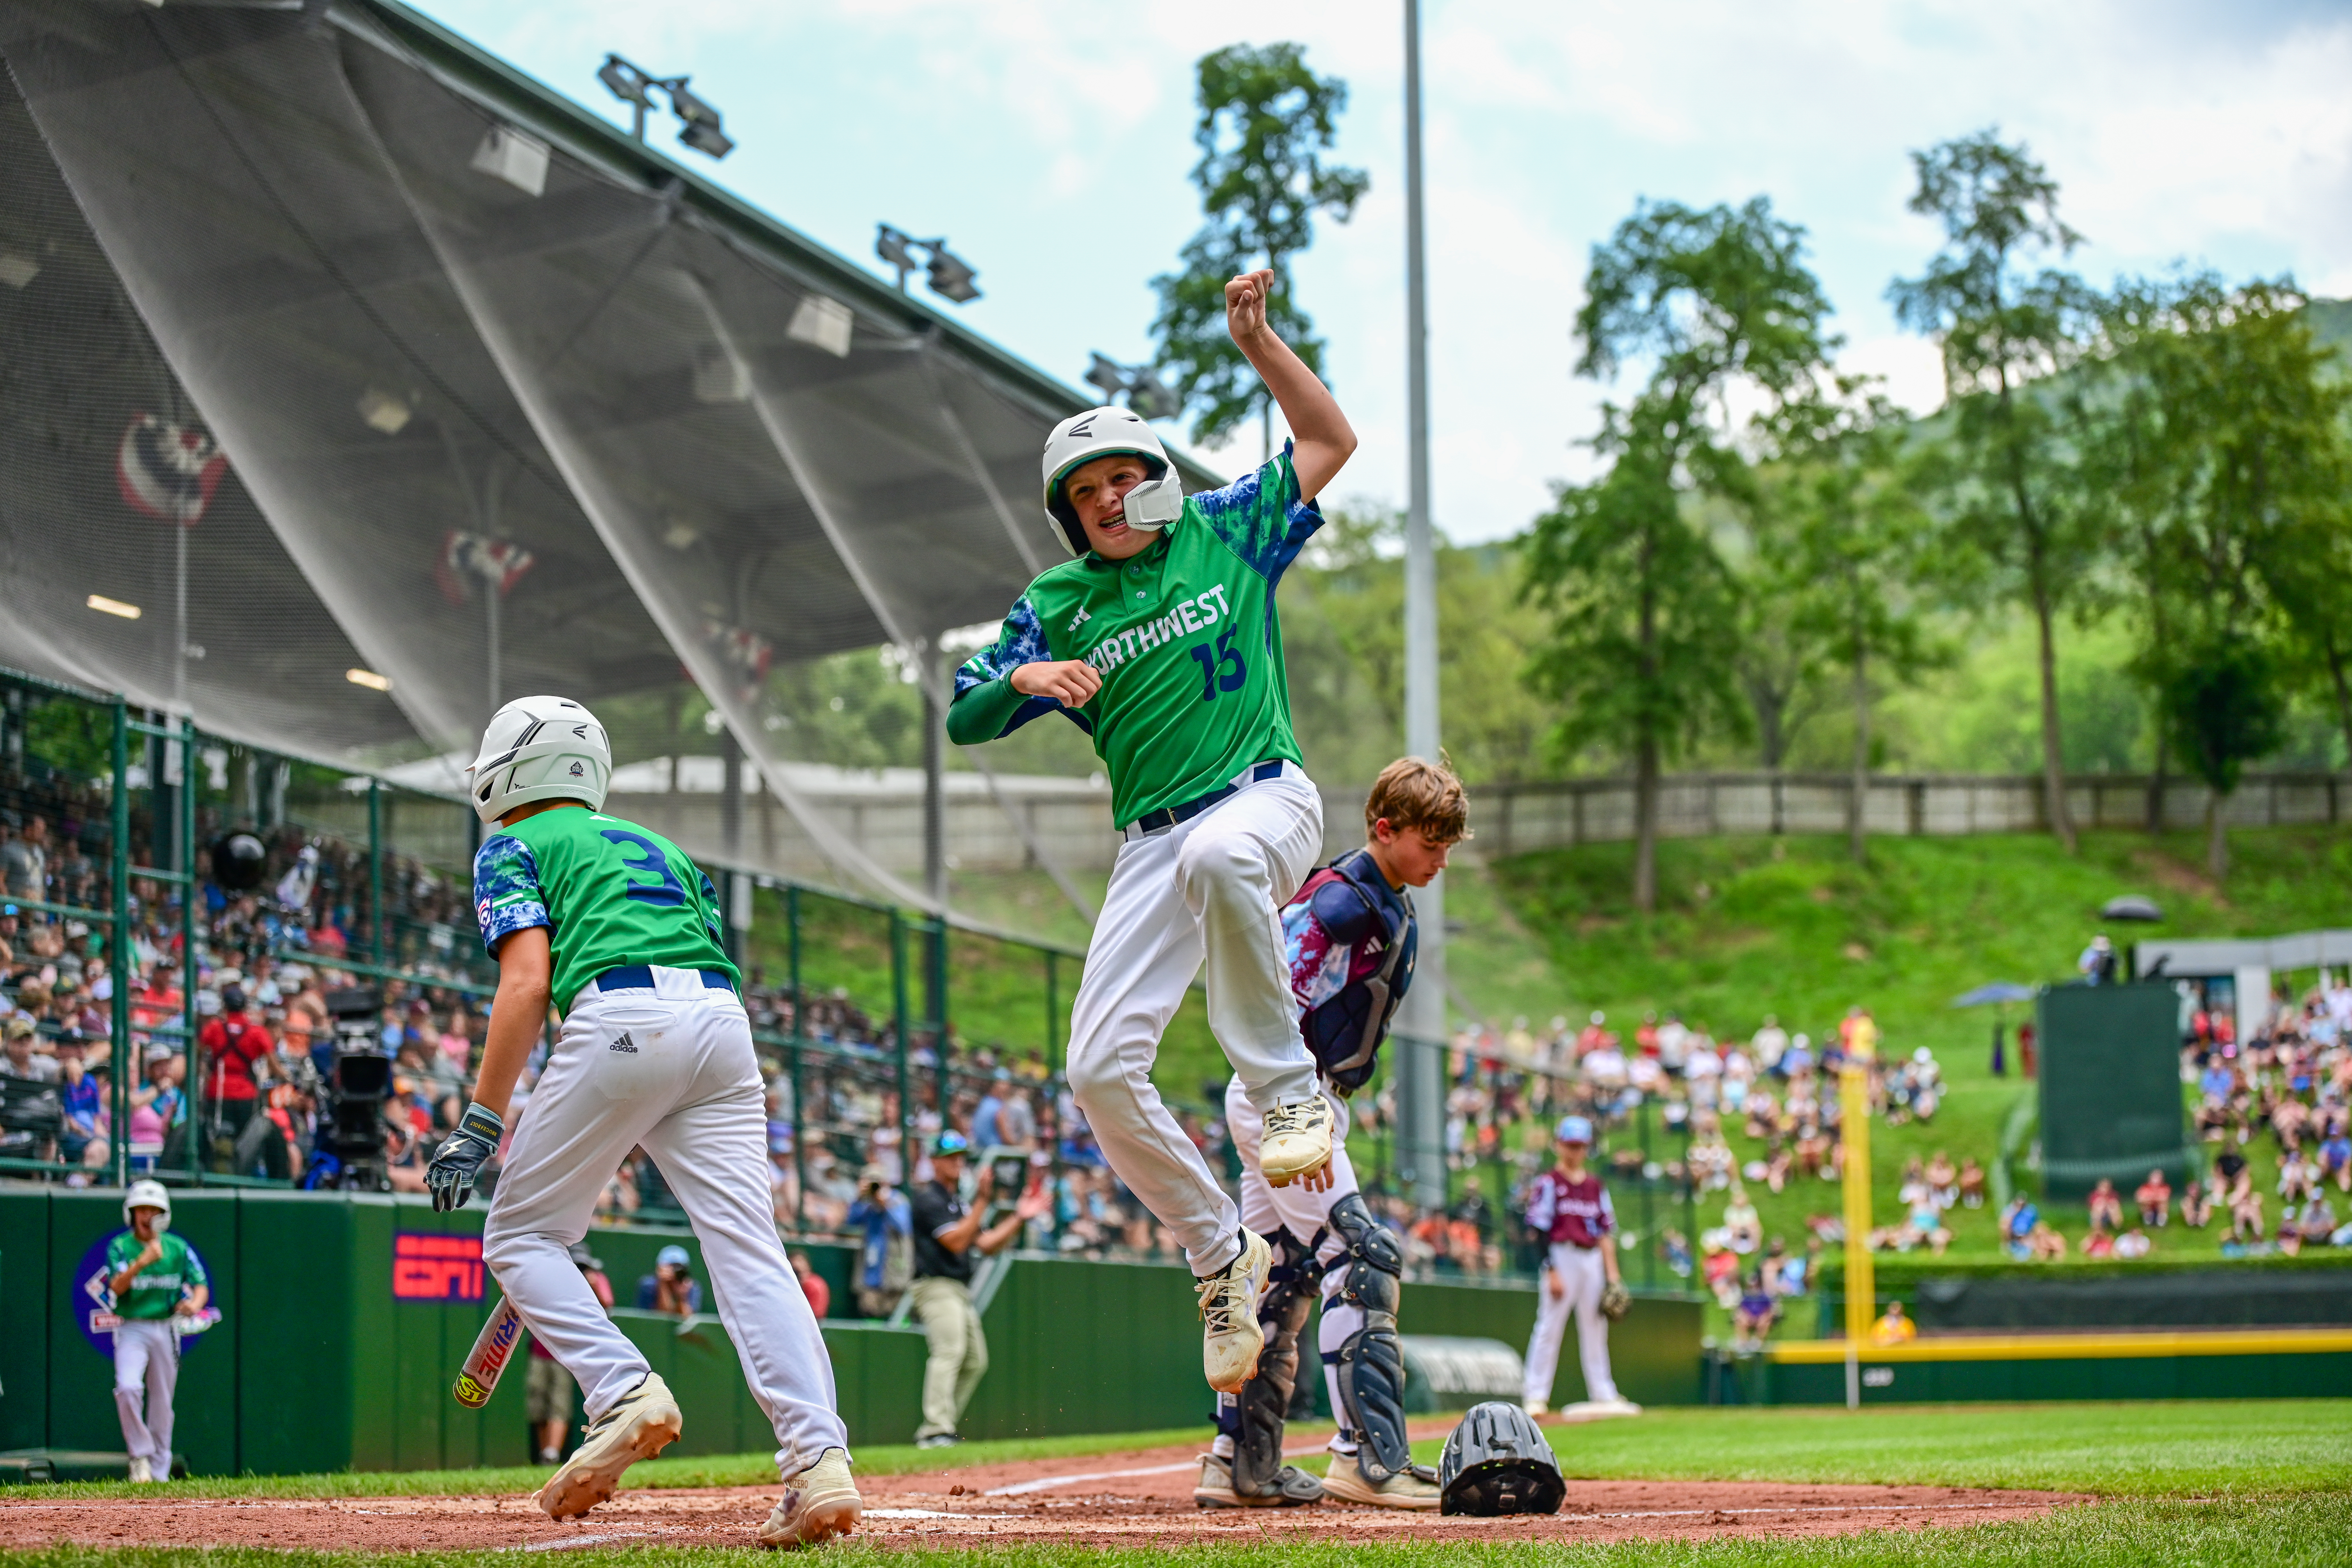 Little League World Series 2023 TV schedule (8/23/23) Free live streams, times, TV channels, dates Watch LLWS online for free